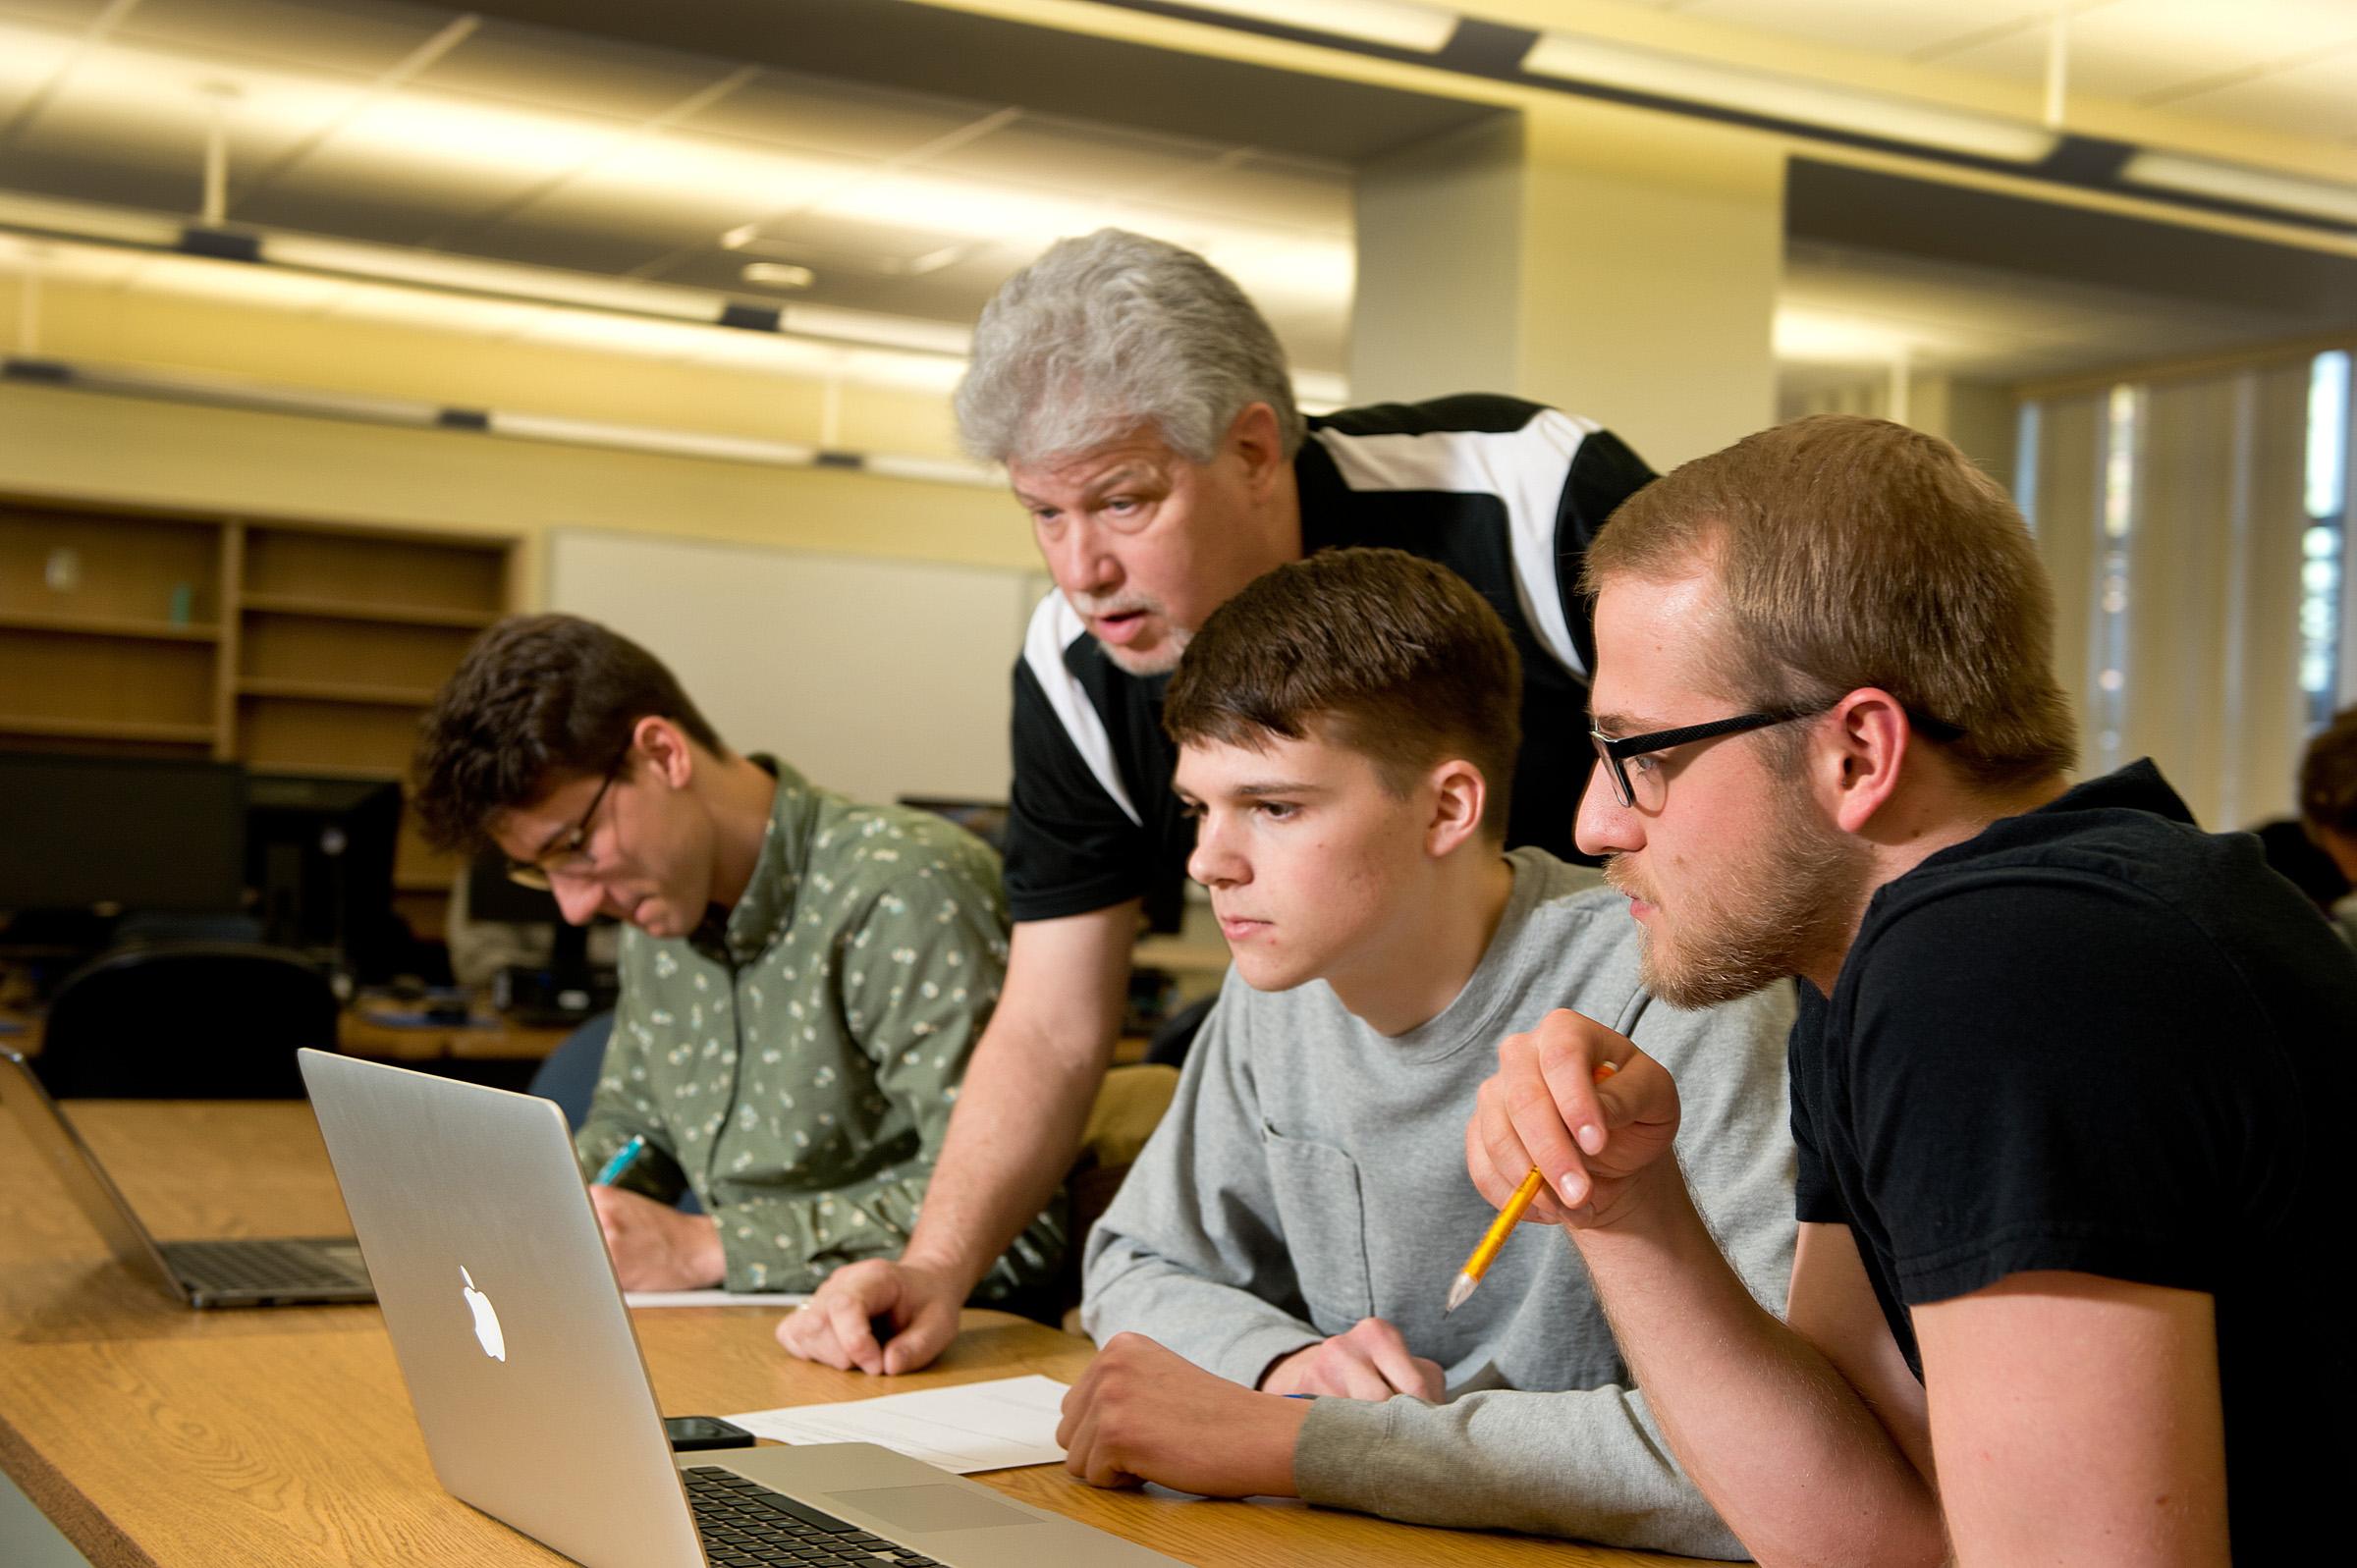 Students working on computer during class while professor is teaching